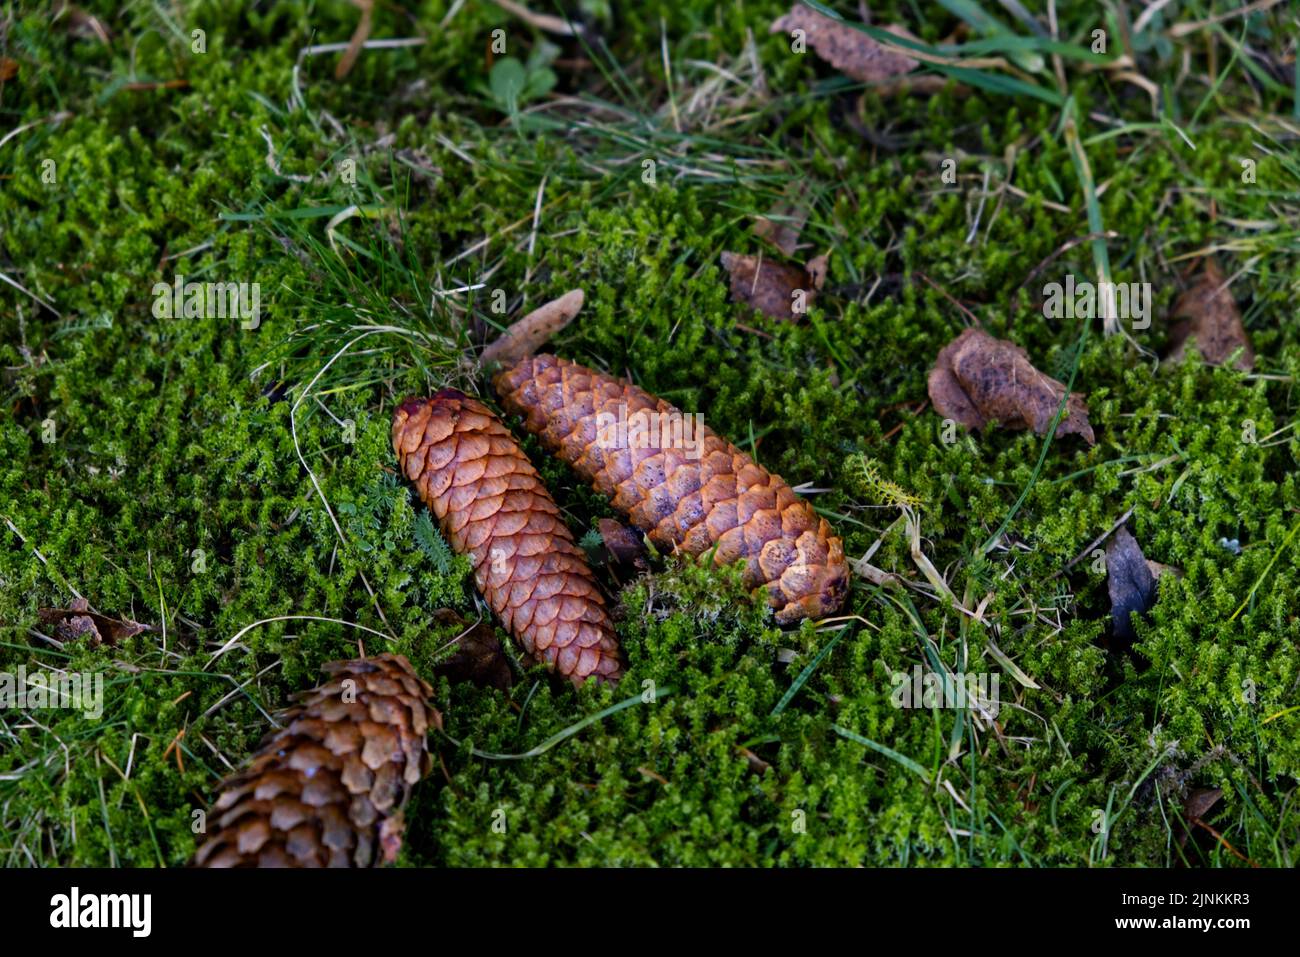 A closeup of Norway spruce cones on green grass. Stock Photo